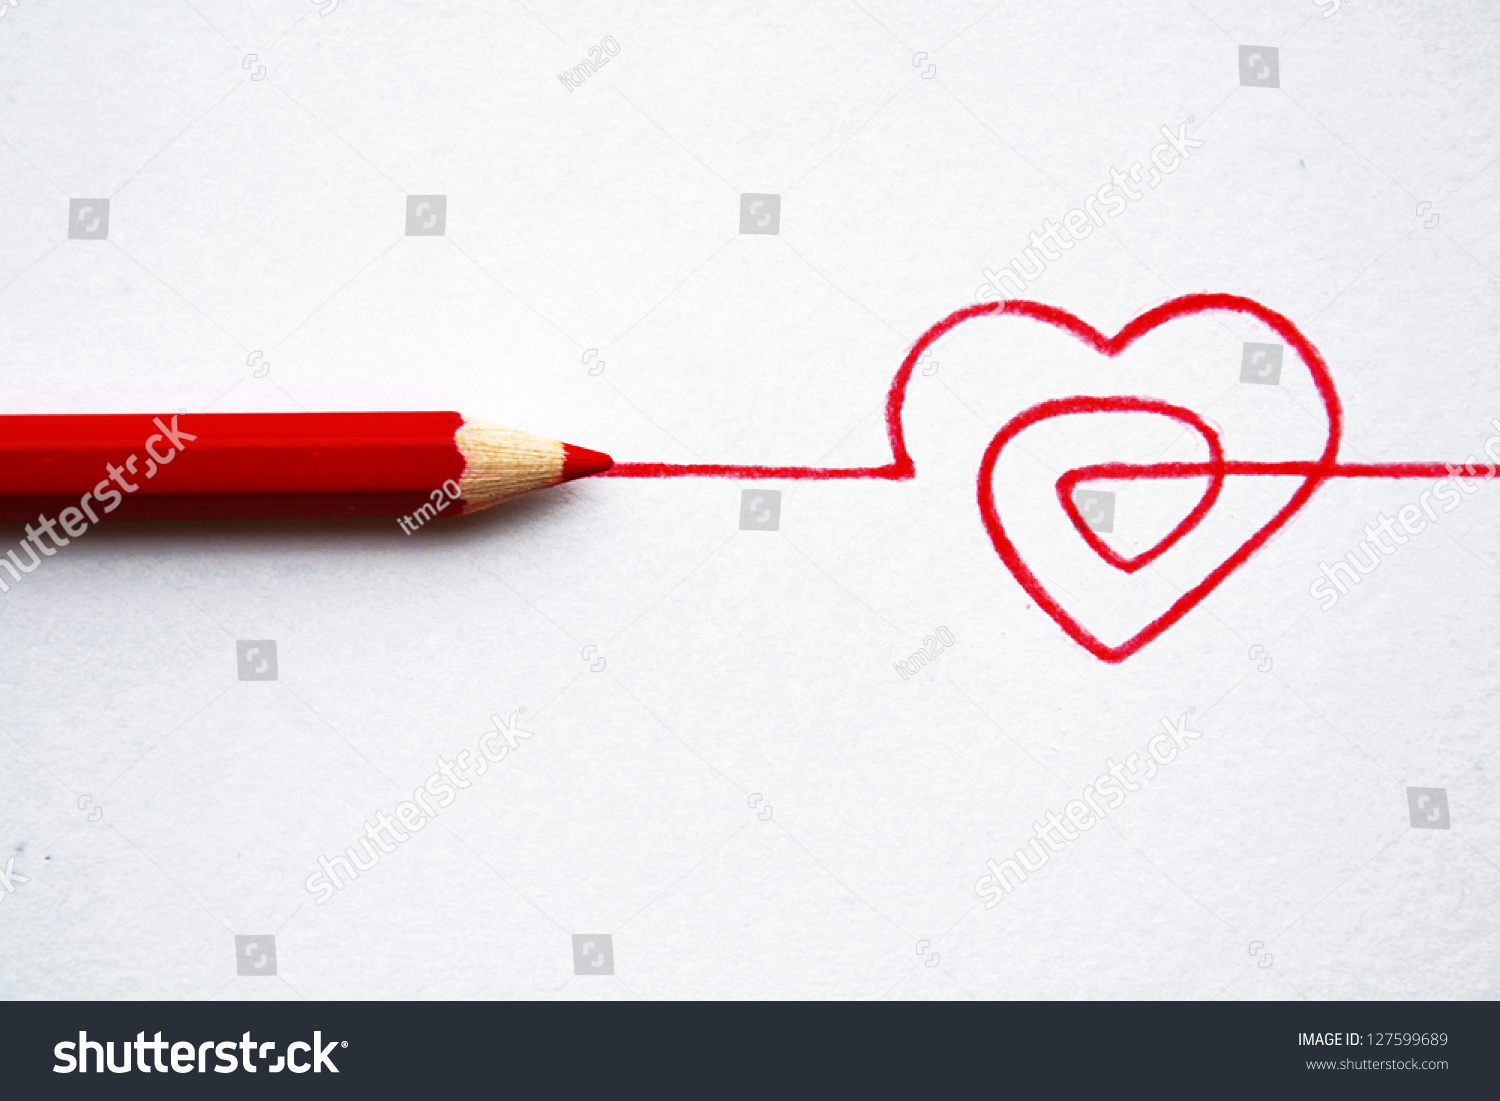 Concept Hand Drawn Heart With Pencils Stock Photo 127599689 : Shutterstock